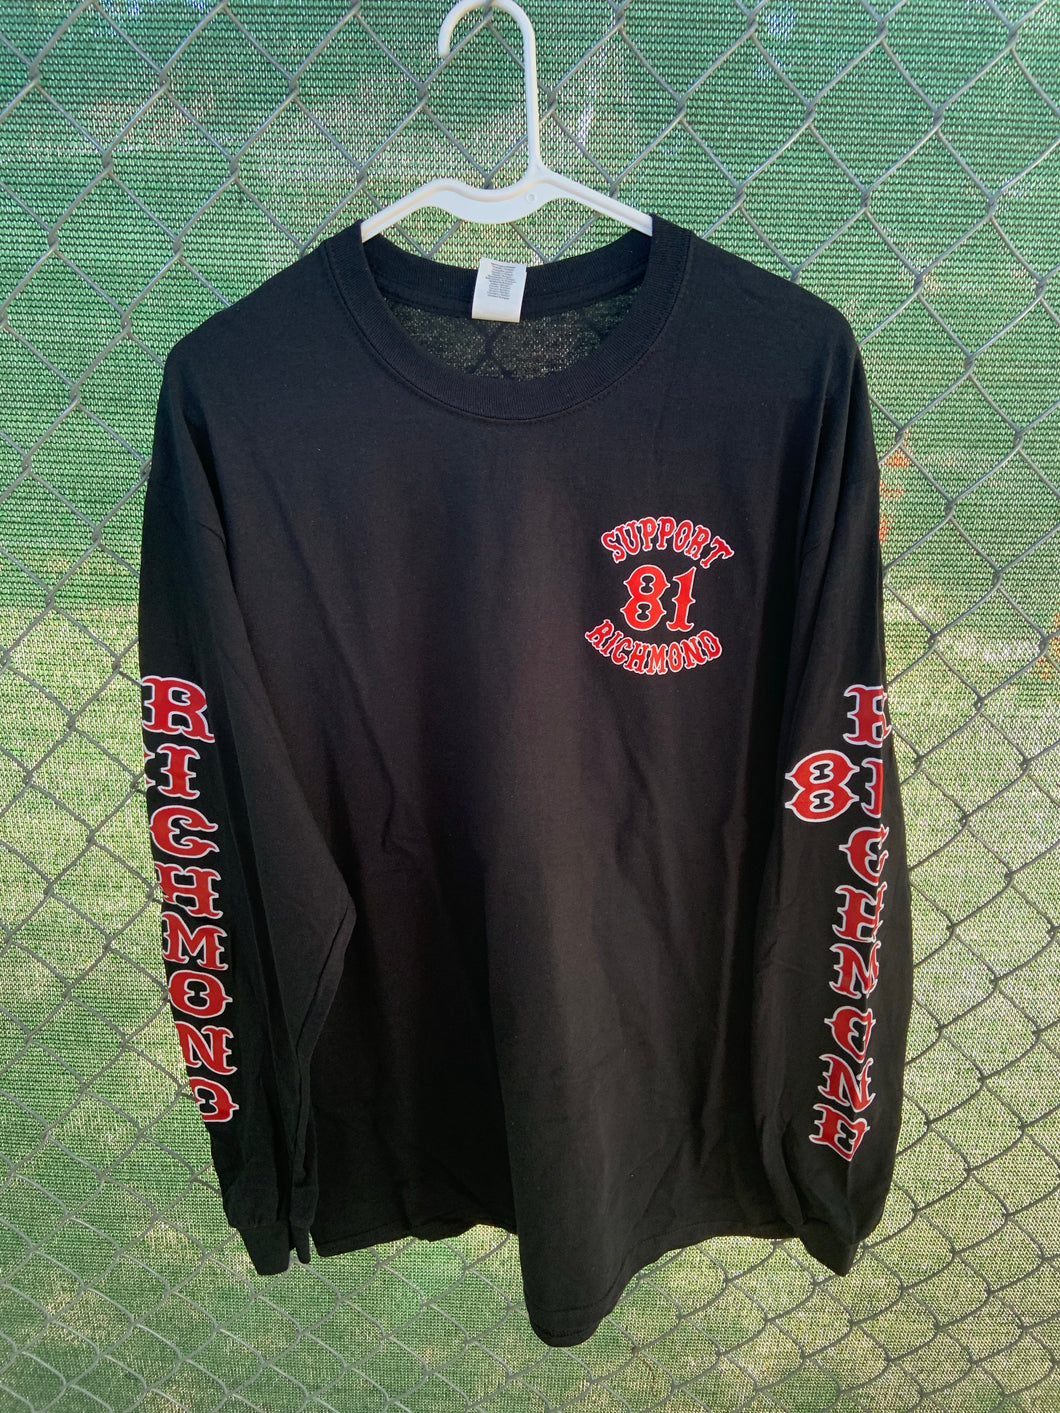 Men’s black long sleeve with richmond down the arms